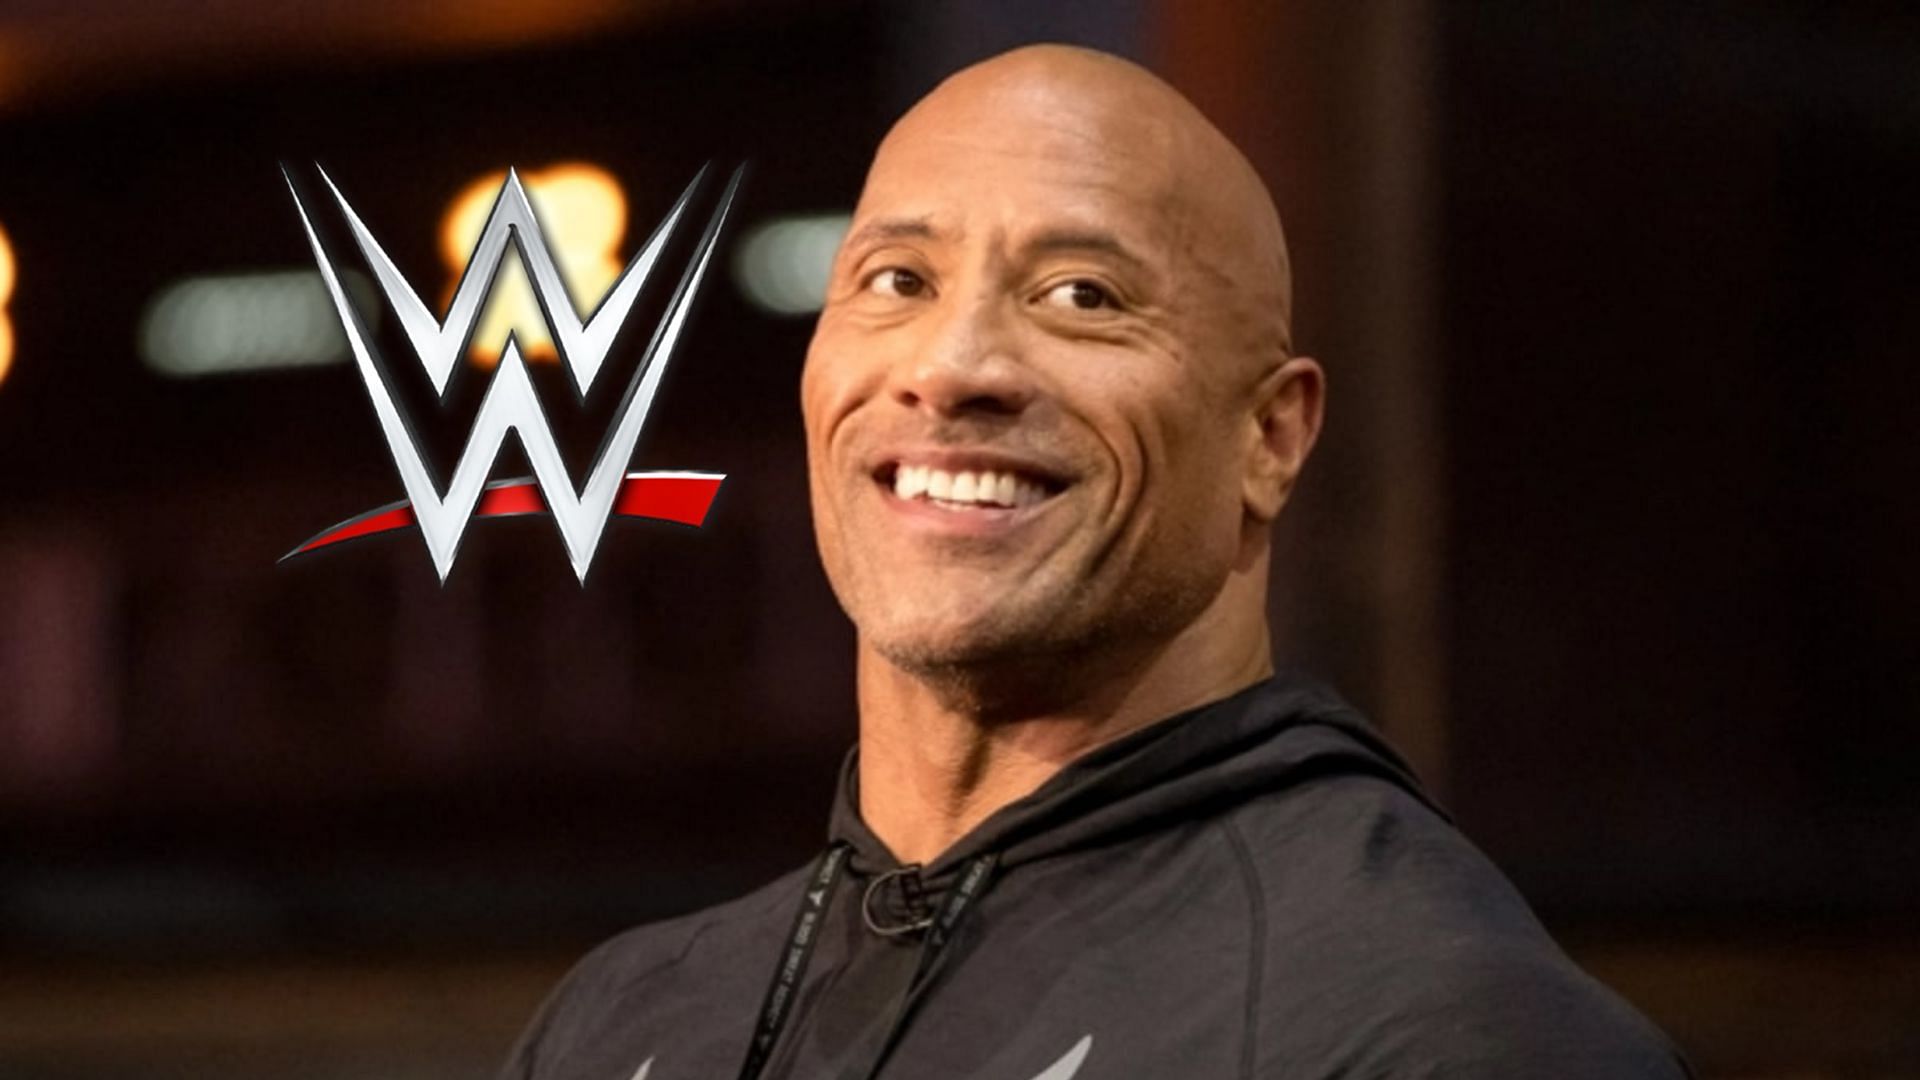 Dwayne &quot;The Rock&quot; Johnson had a successful WWE career before moving into acting.